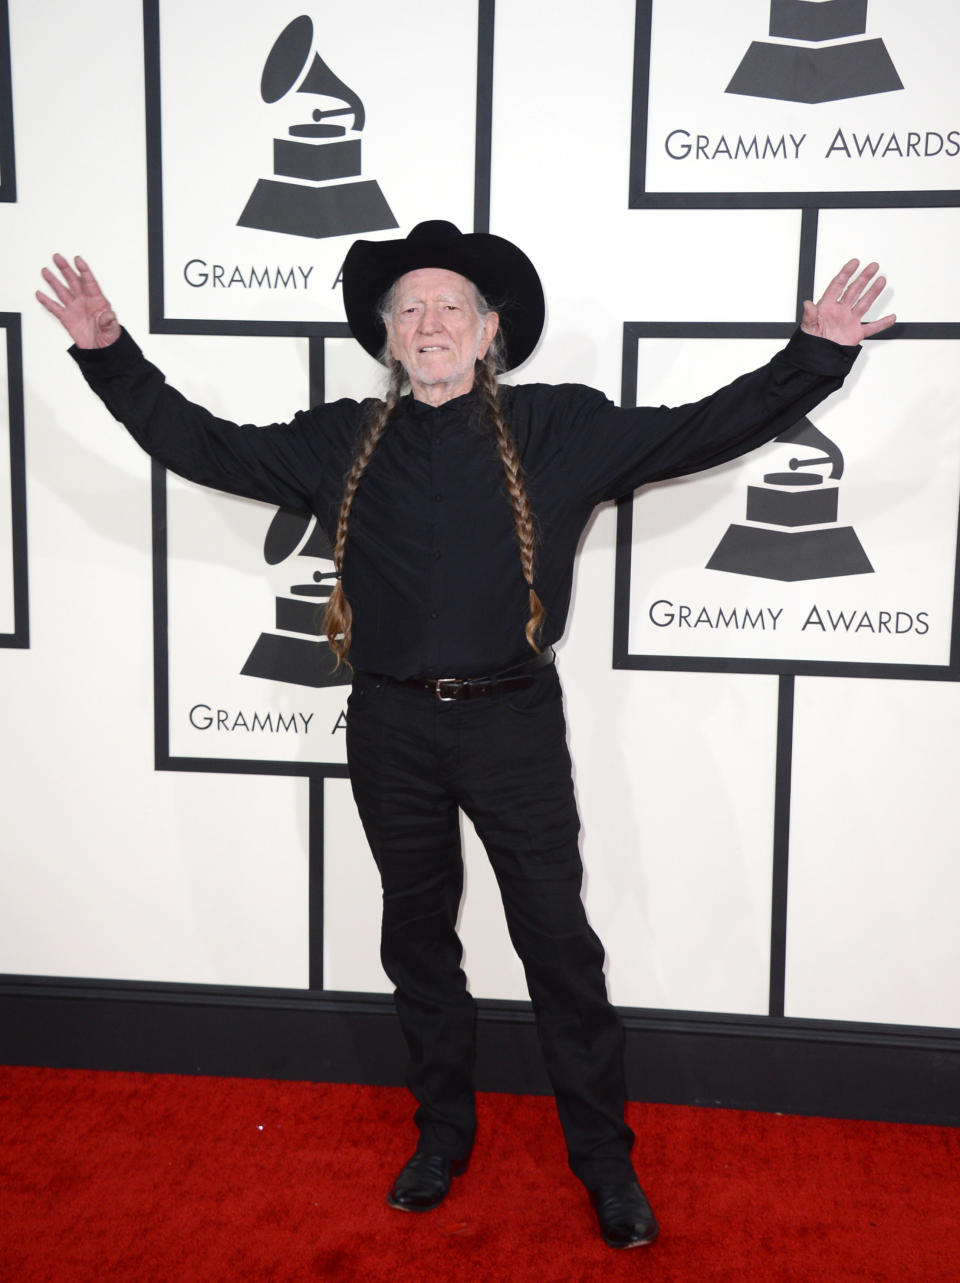 Willie Nelson arrives at the 56th annual GRAMMY Awards at Staples Center on Sunday, Jan. 26, 2014, in Los Angeles. (Photo by Jordan Strauss/Invision/AP)